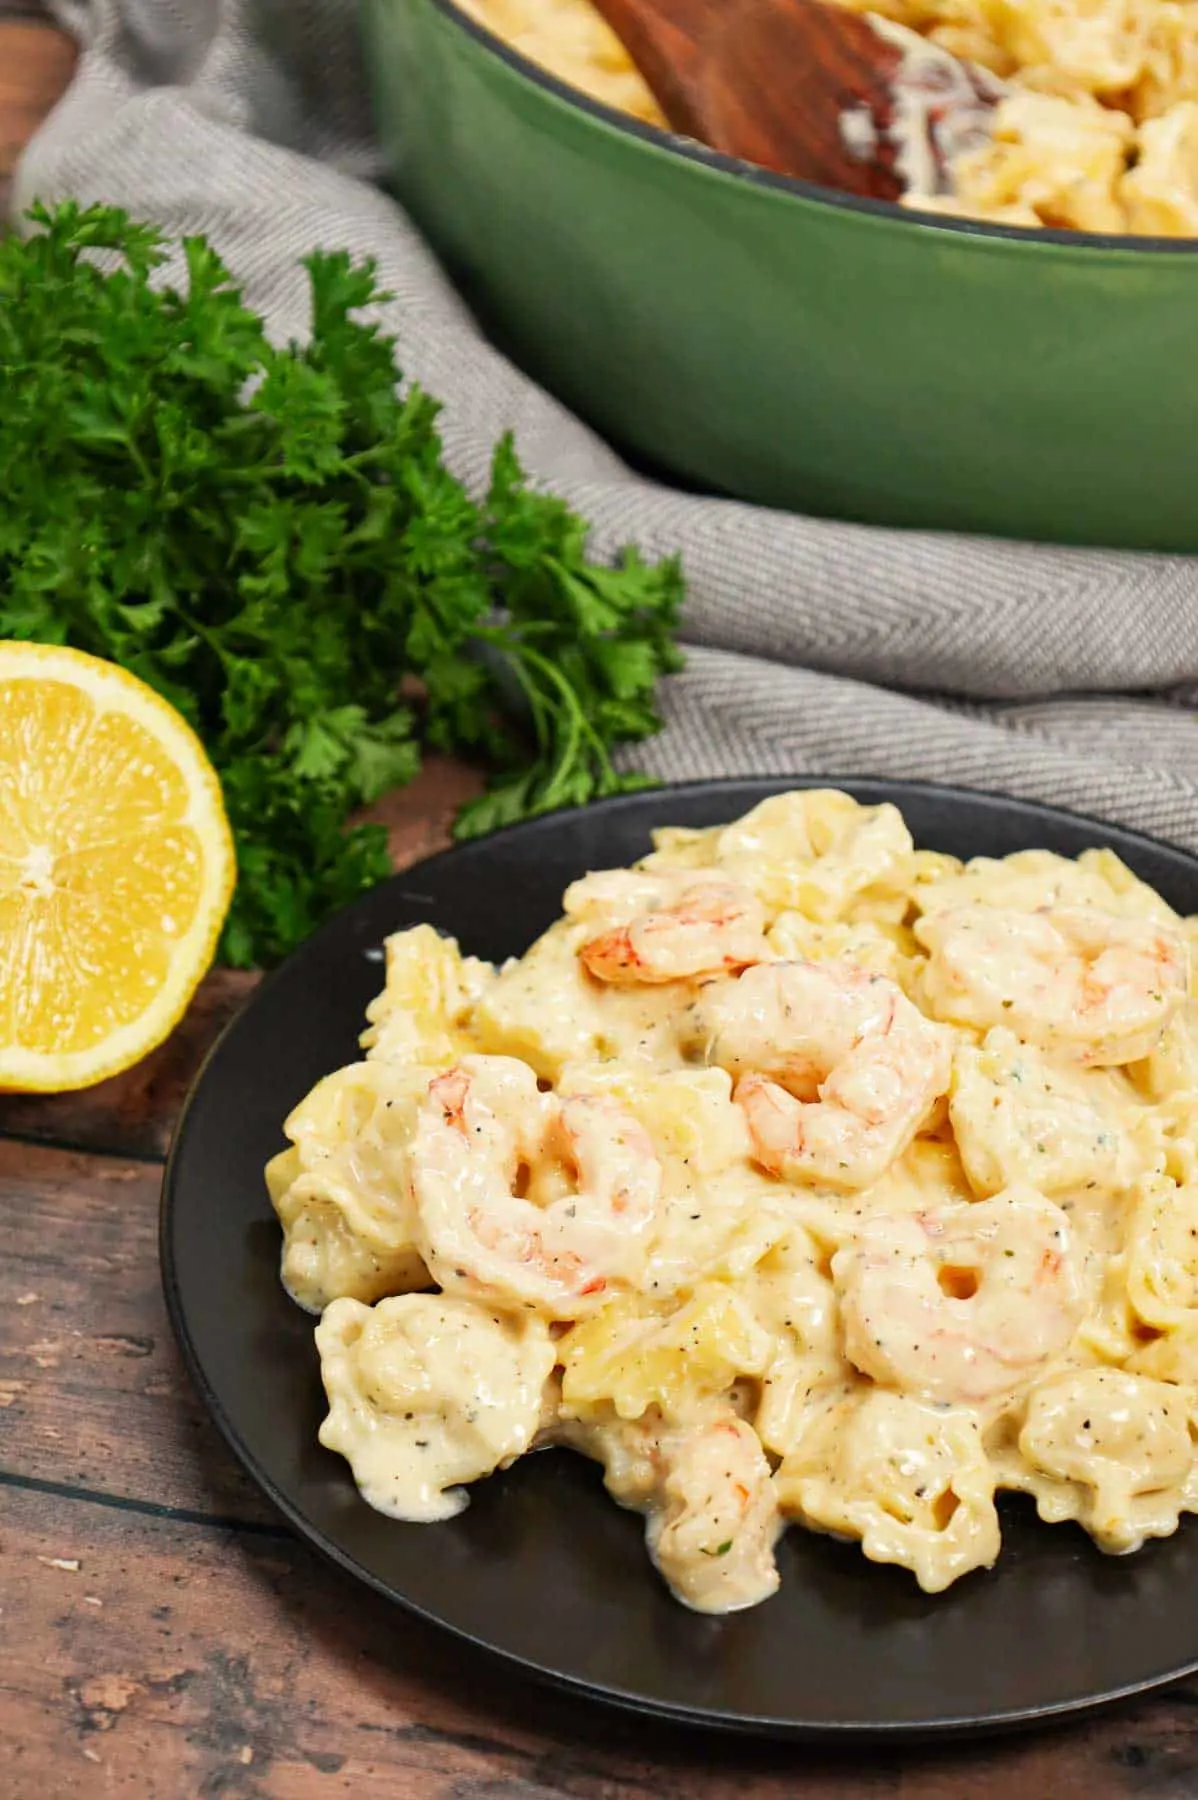 Shrimp Tortellini Alfredo is a delicious seafood pasta recipe with cheese tortellini and tender shrimp all tossed in a creamy garlic parmesan sauce.